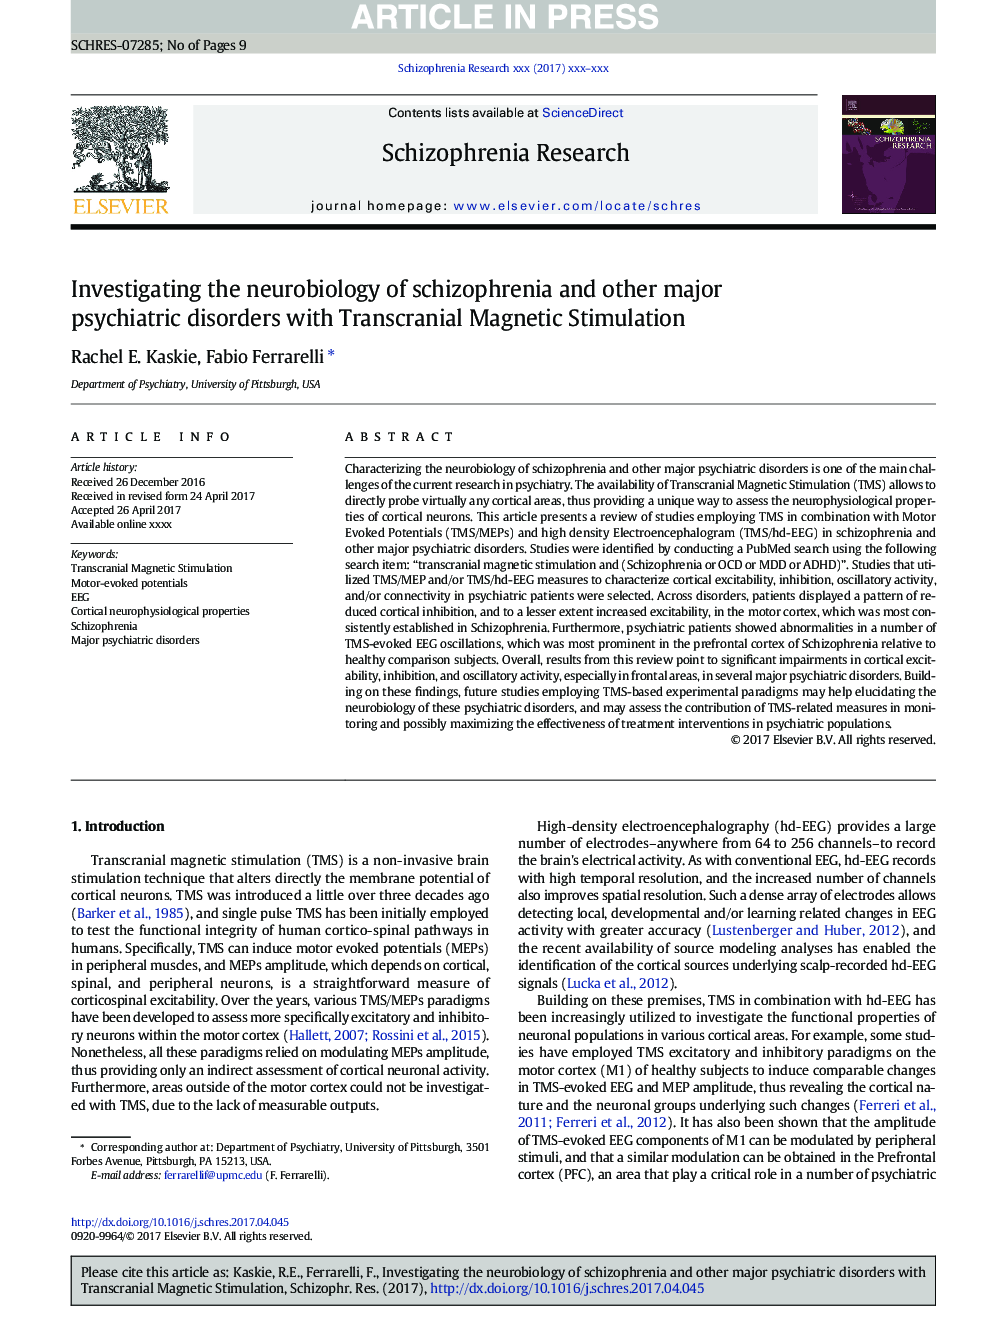 Investigating the neurobiology of schizophrenia and other major psychiatric disorders with Transcranial Magnetic Stimulation